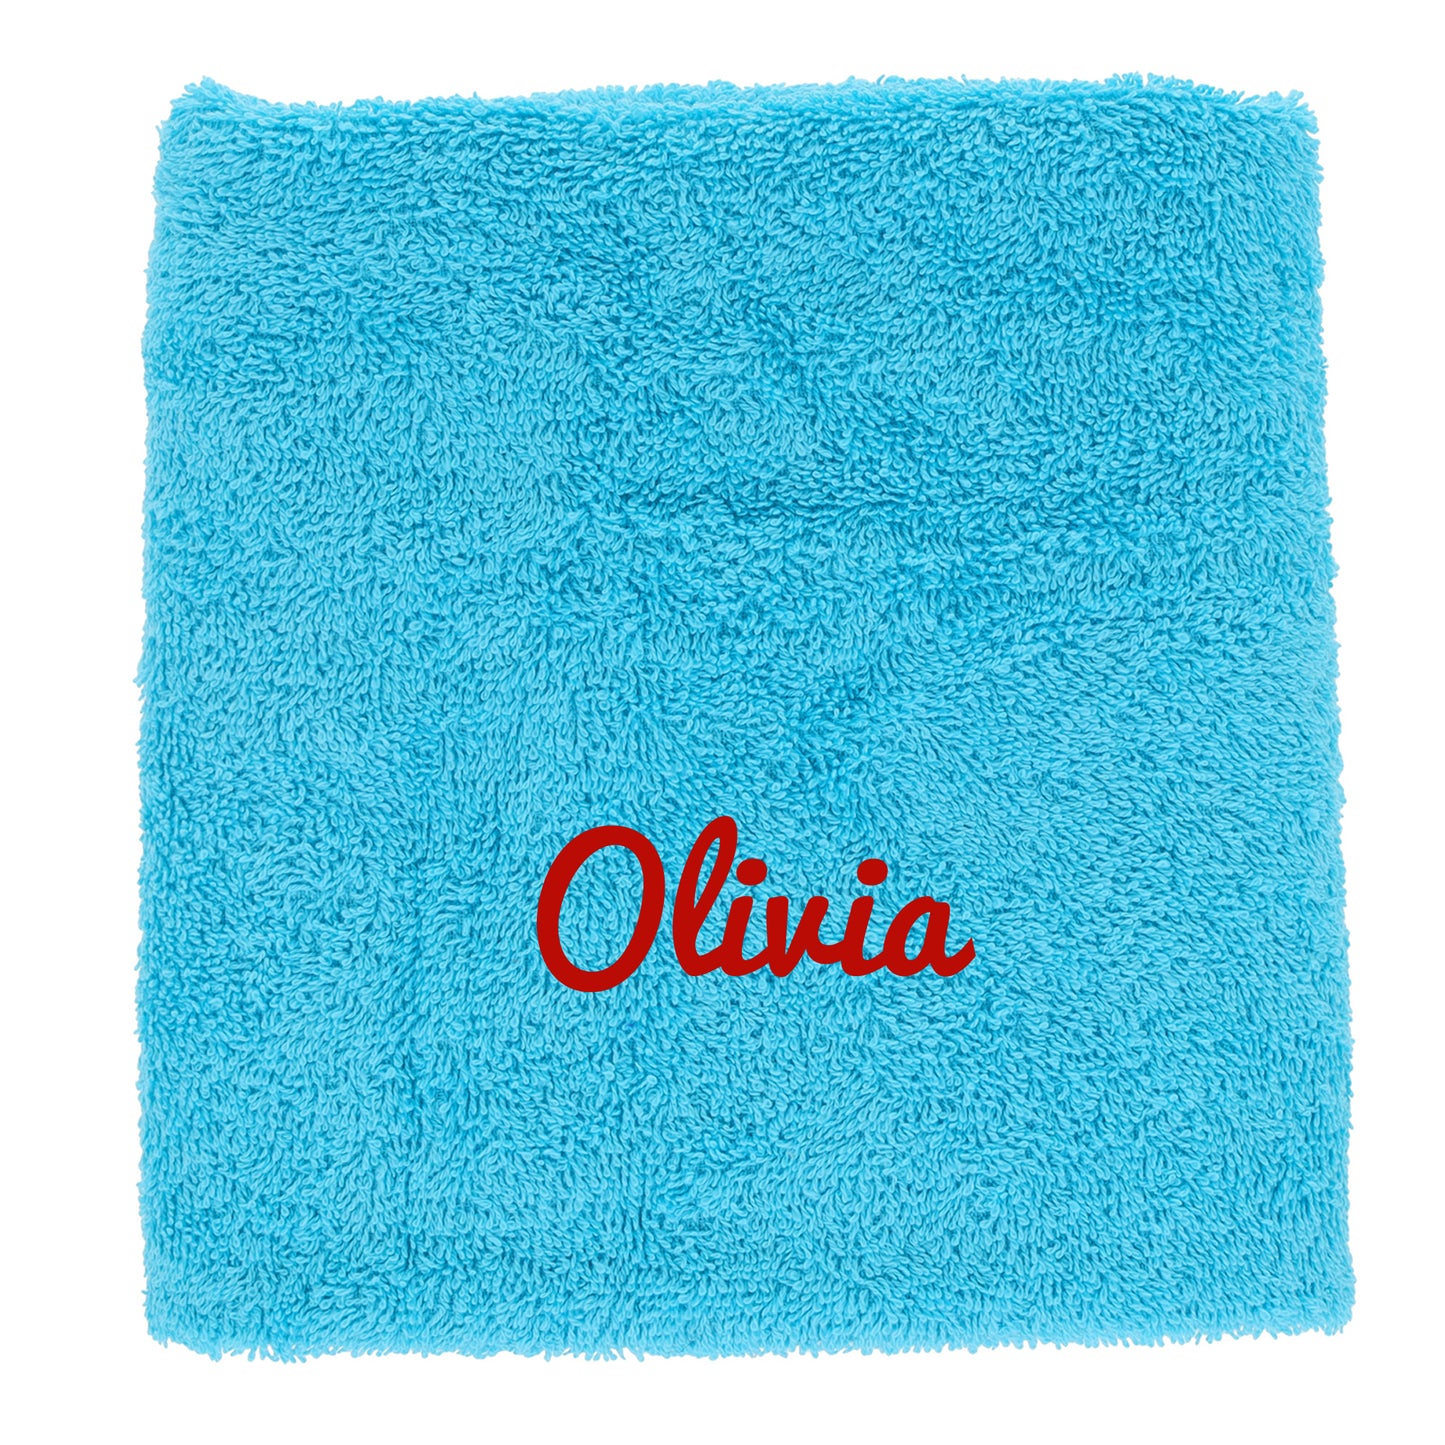 Personalised Embroidered Name Towel Bath or Hand Size  - Always Looking Good -   